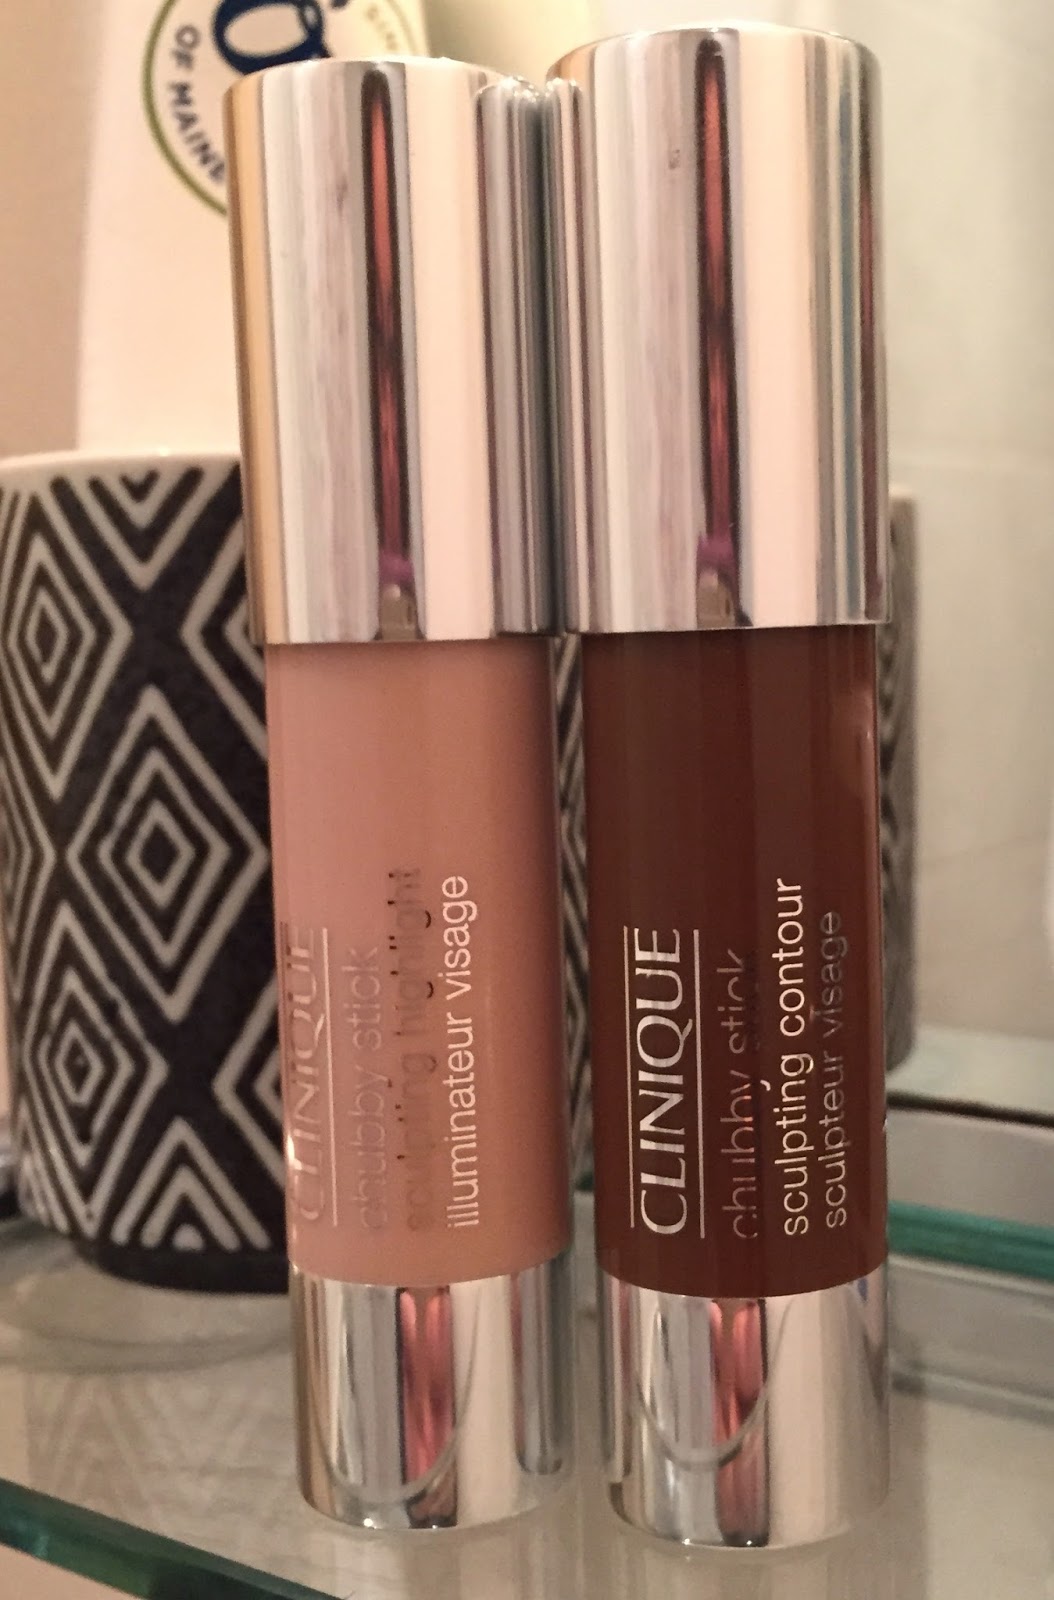 Clinique Chubby Sculpting Sticks in Curvy Contour and Hefty